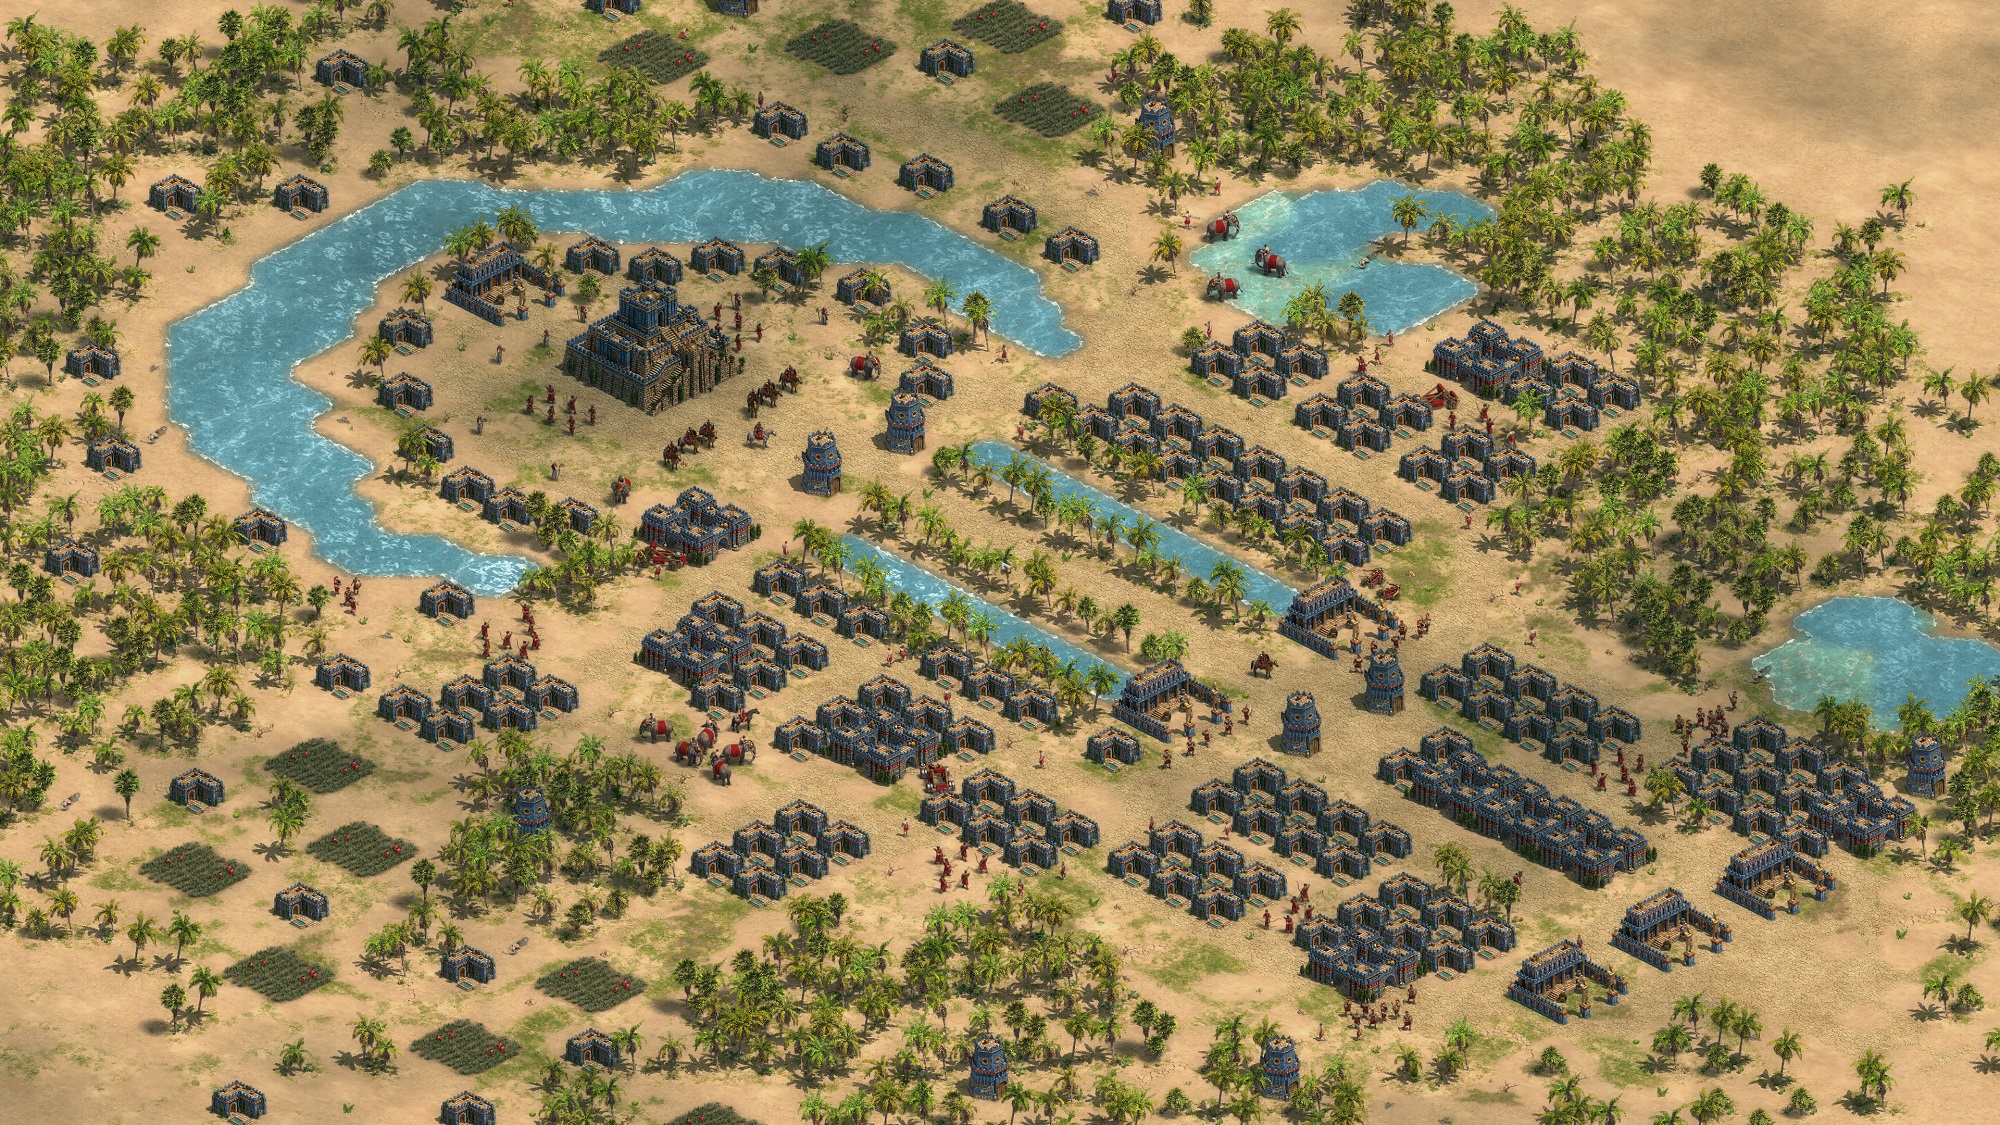 Review: Age of Empires: Definitive Edition is an